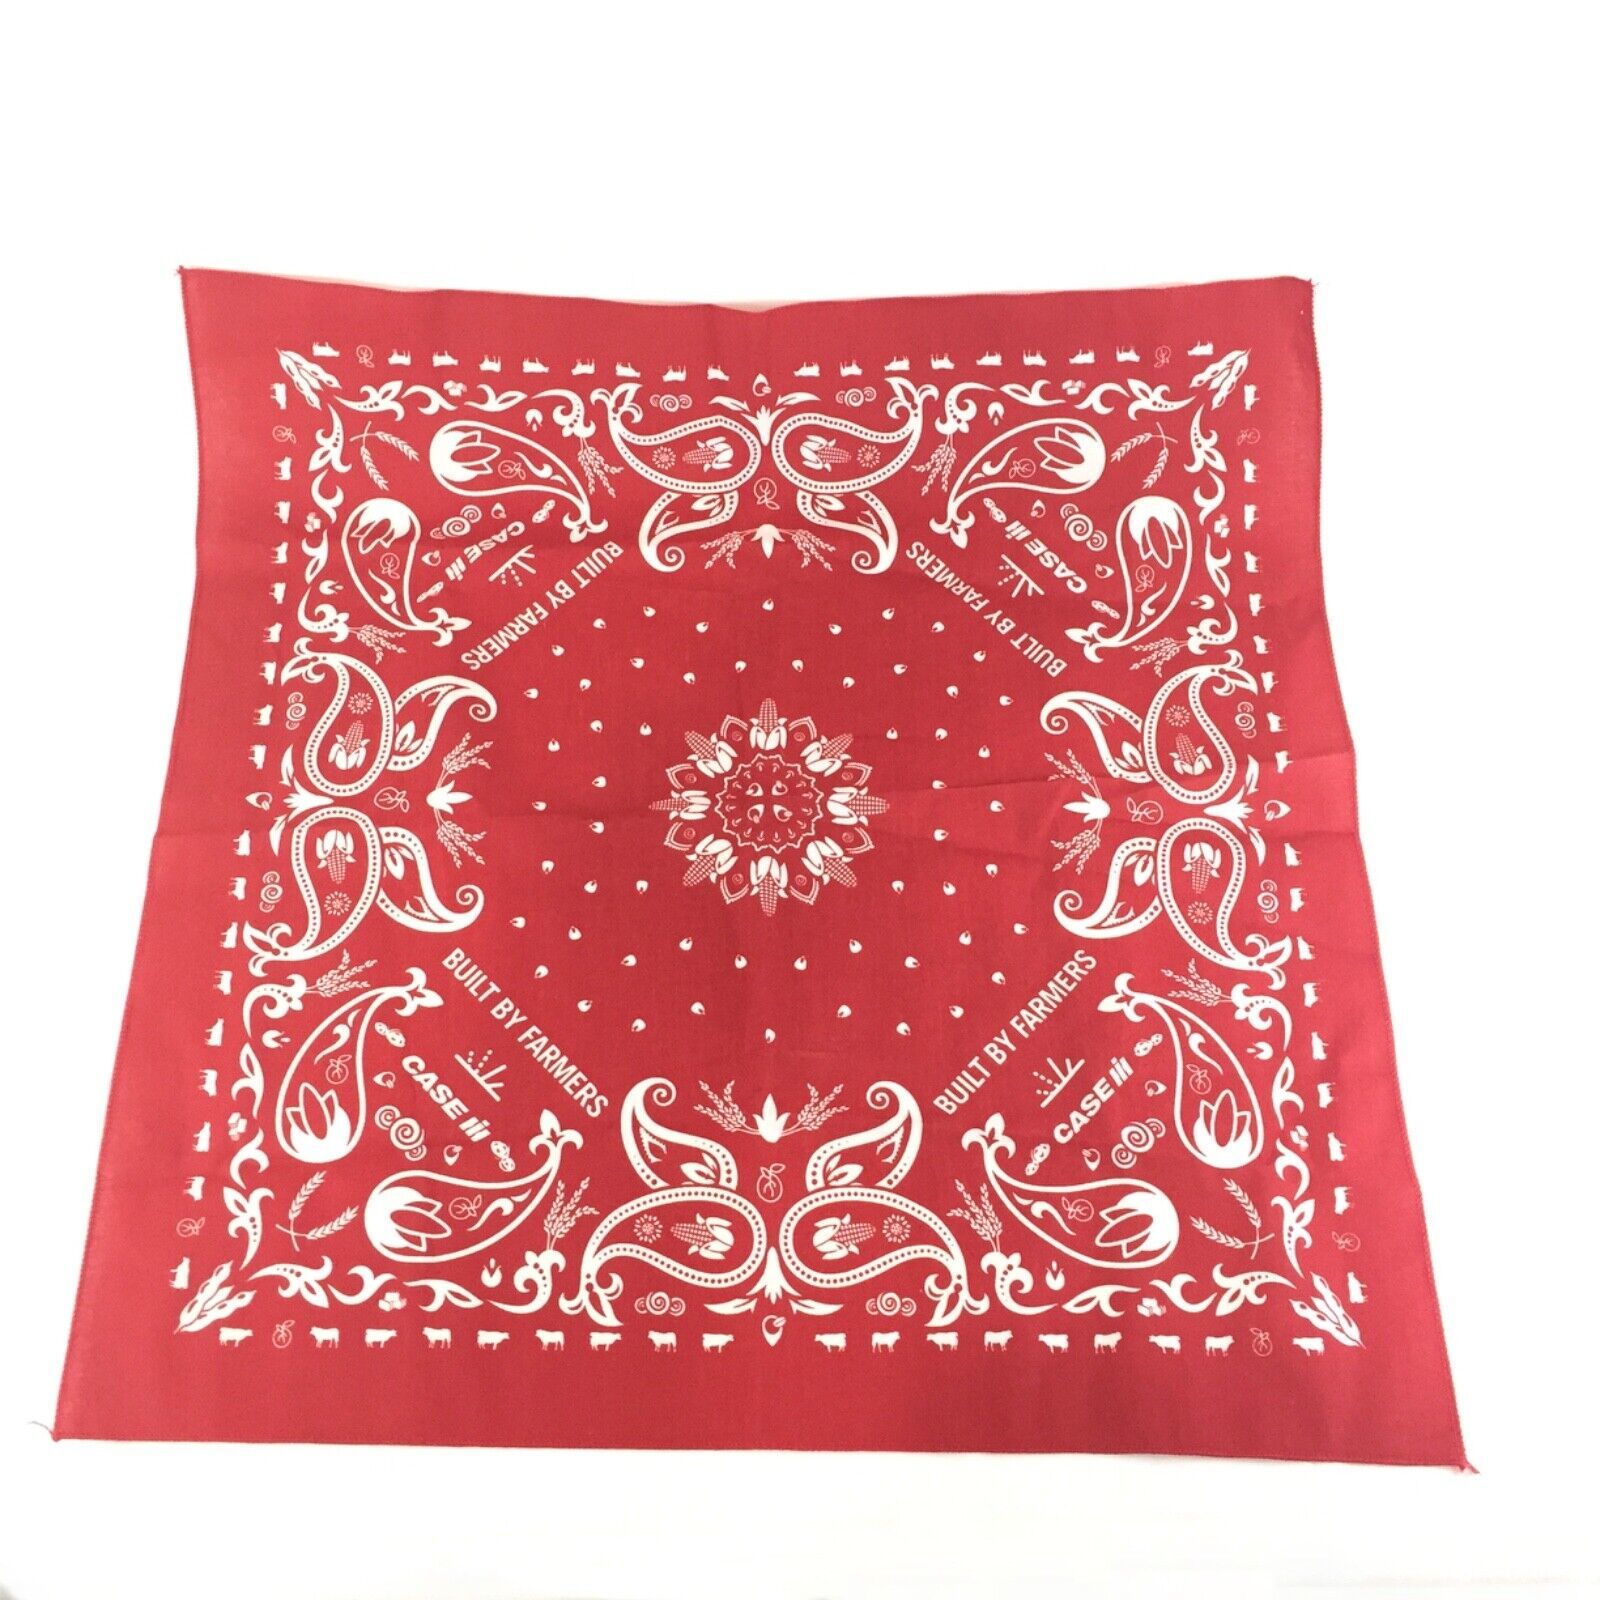 Primary image for New Case Red & White Bandana w Cows Built By Farmers Cow Border Corn Wheat